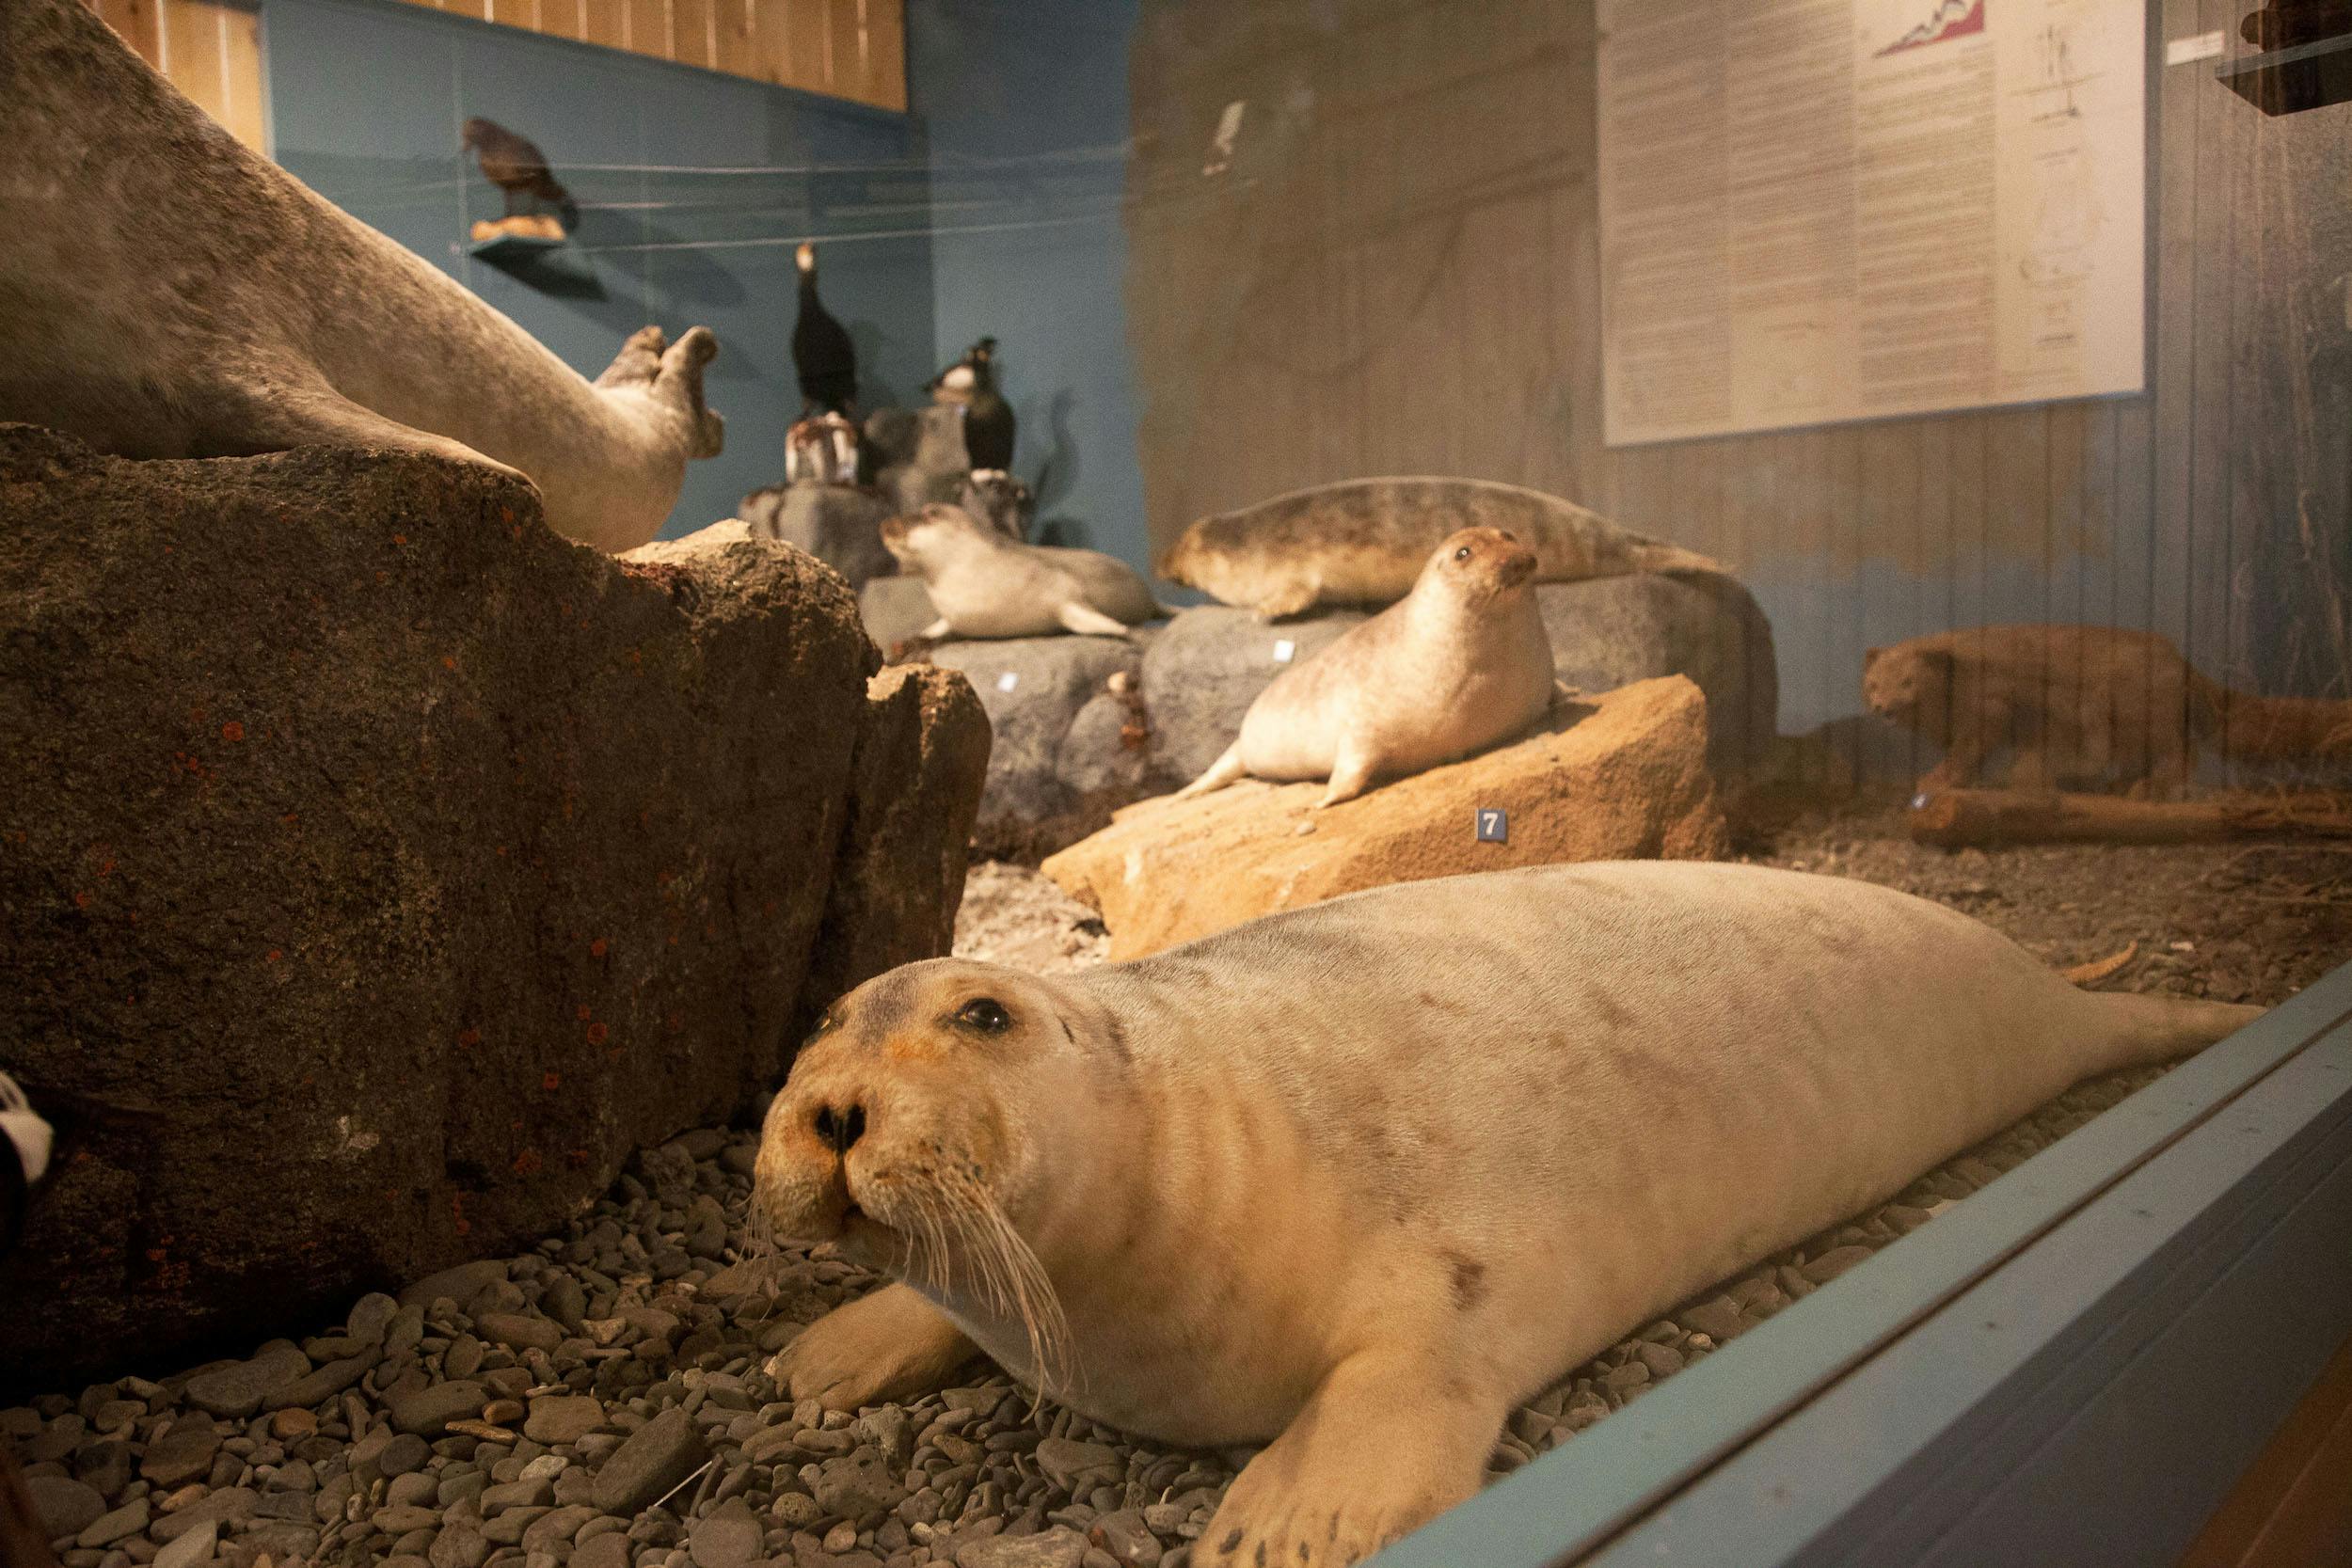 Stuffed seal in an exhibition case at the Seal Center